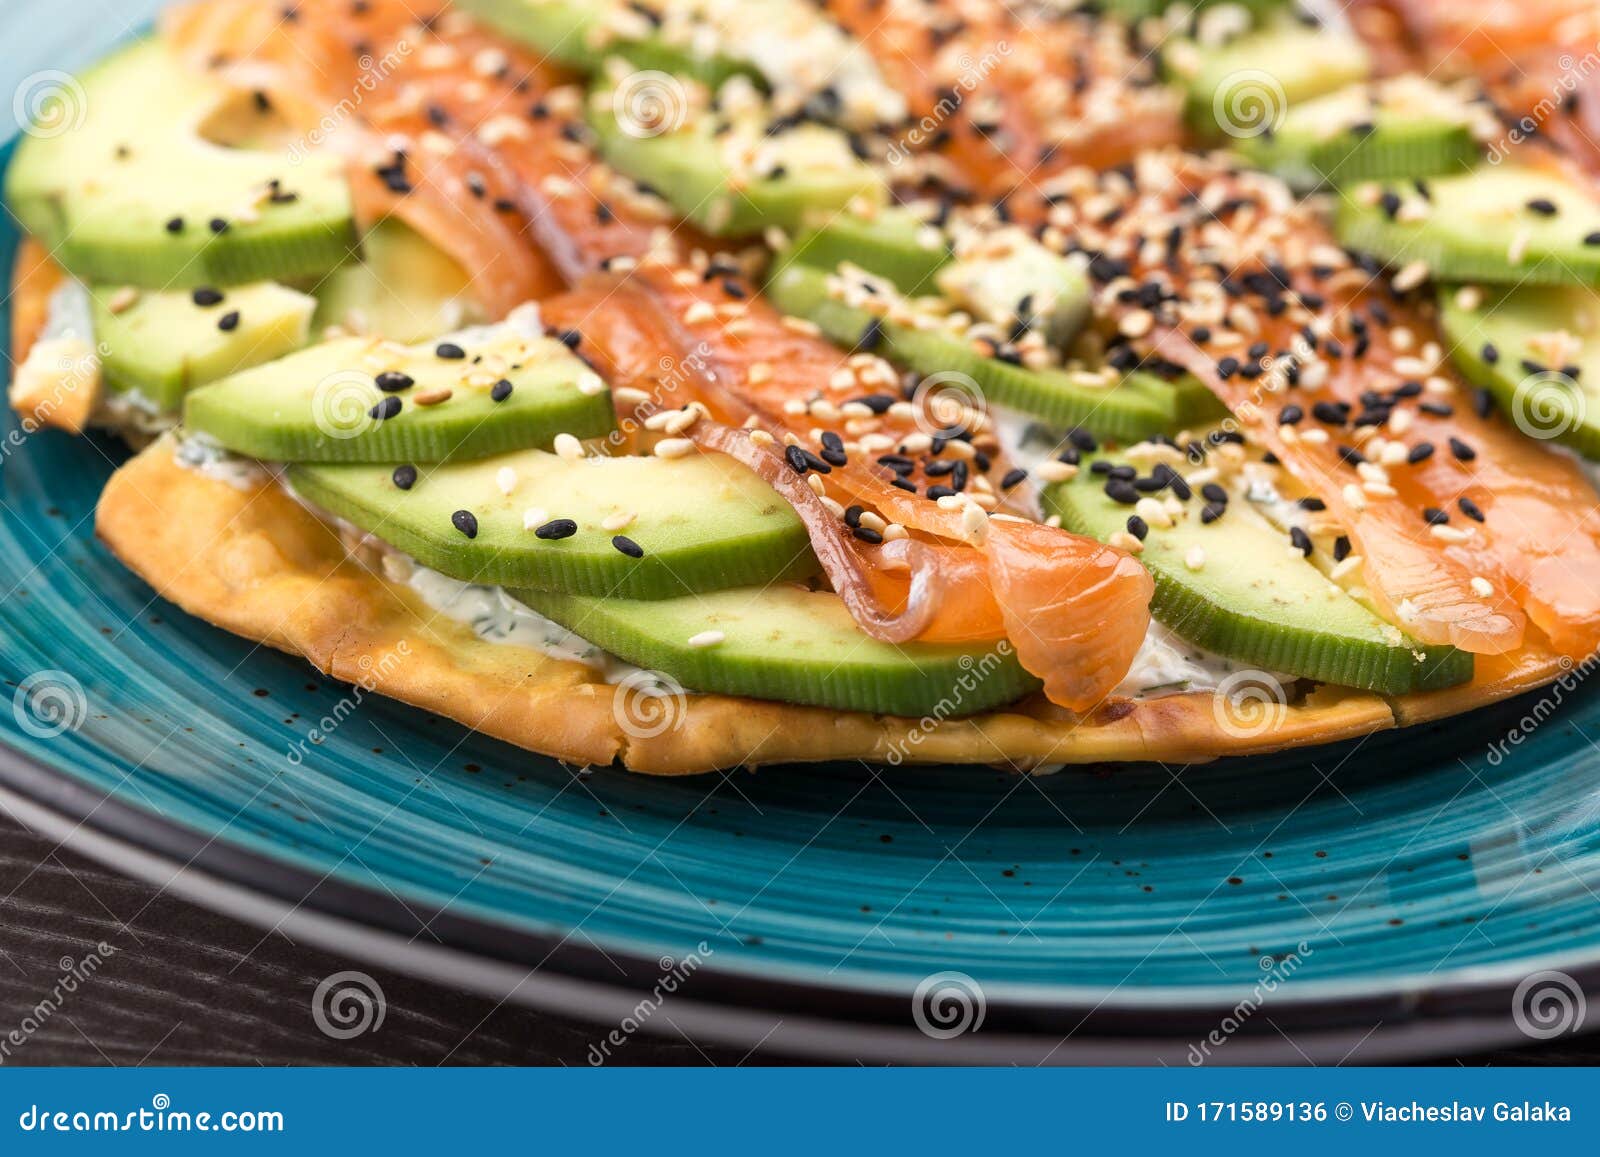 Salmon and Tortilla Appetizer Stock Photo - Image of fresh, appetizer ...